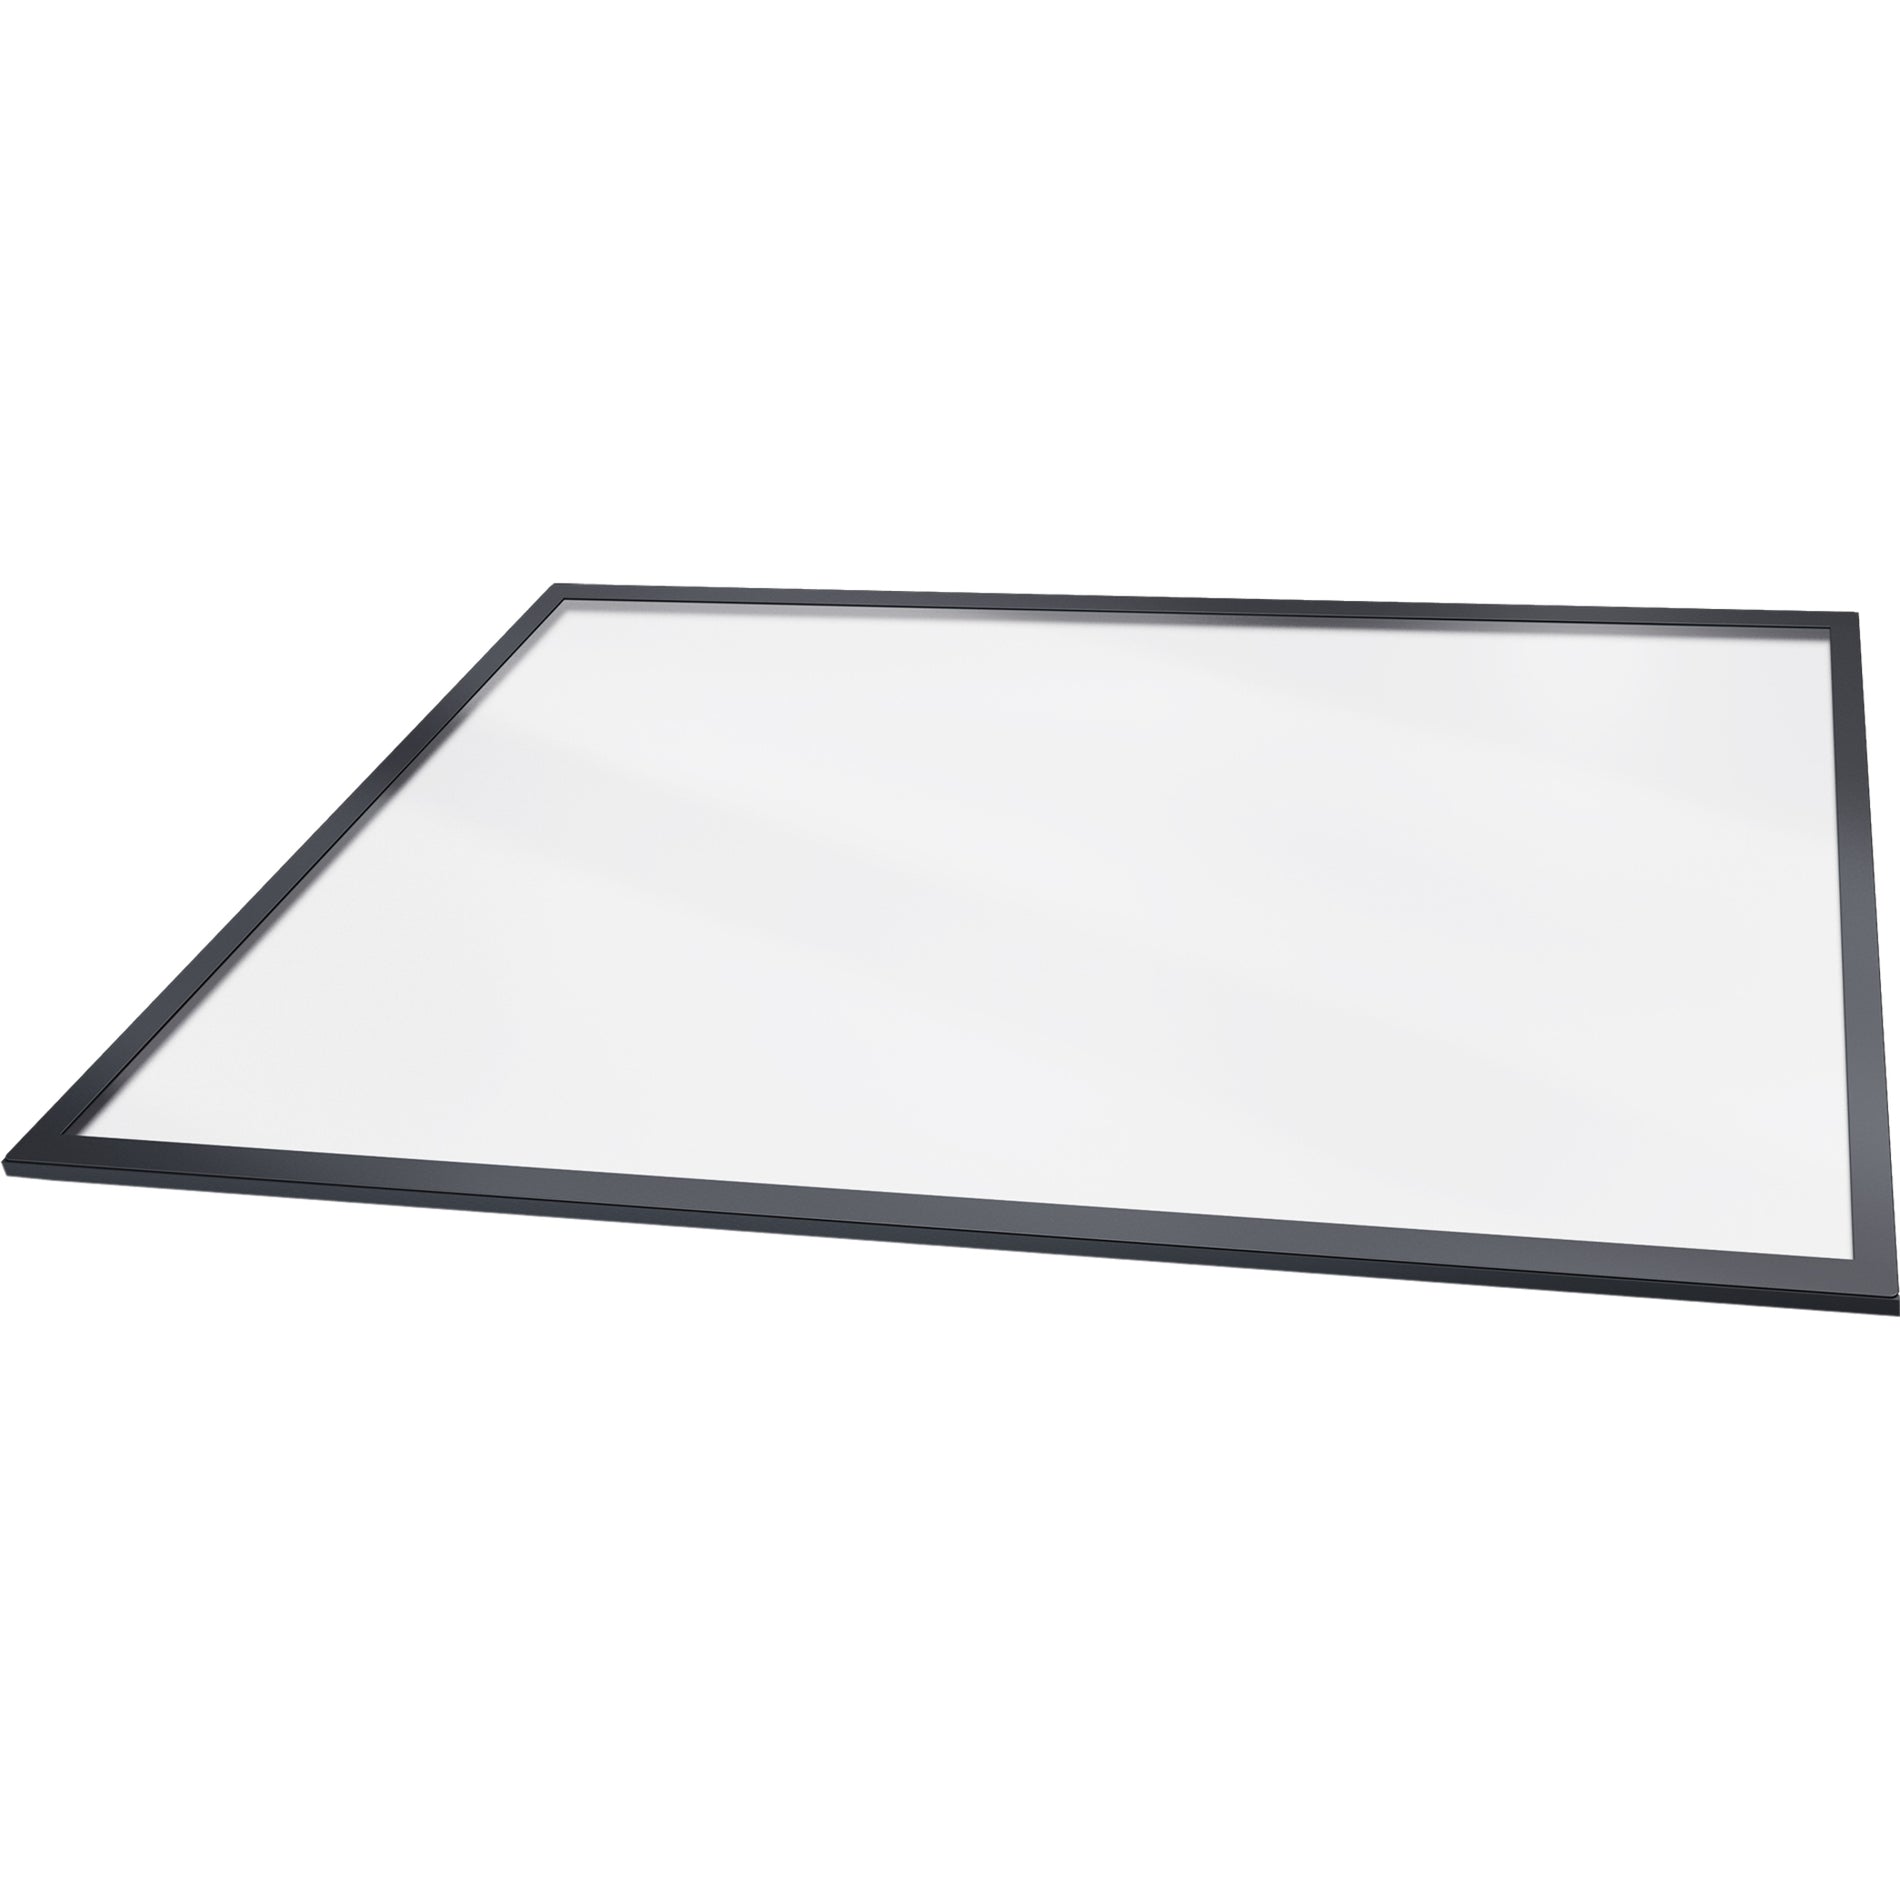 APC ACDC2100 Ceiling Panel - 900mm (36in), Environmentally Friendly, RoHS and REACH Certified